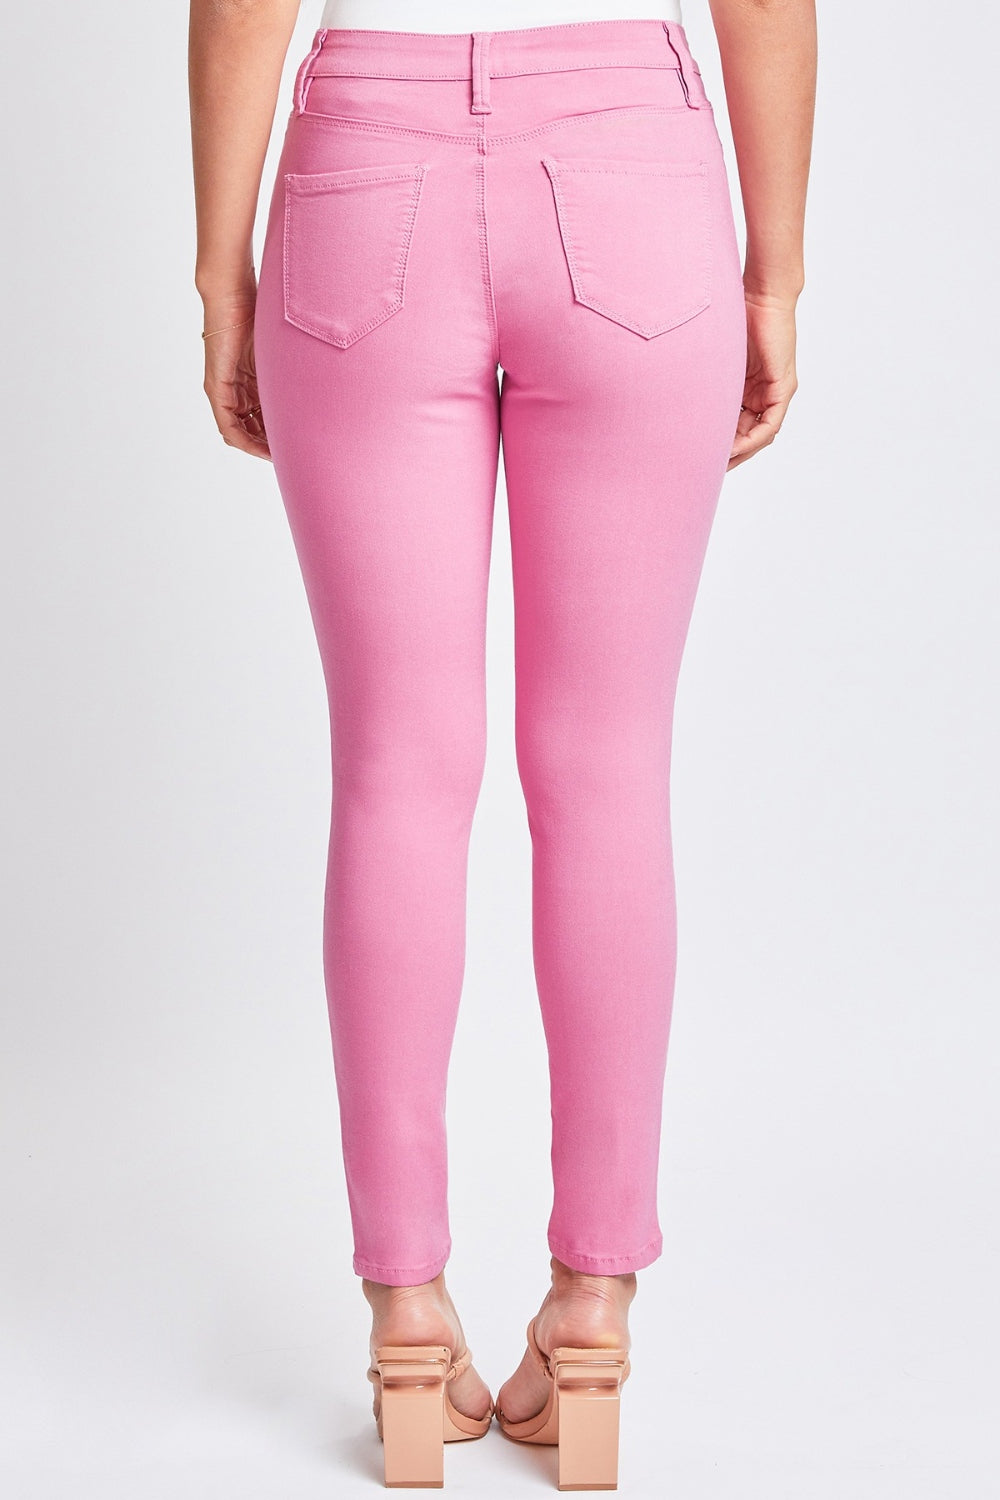 Morgan Hyperstretch Mid-Rise Skinny Pants in Flaming Flamingo